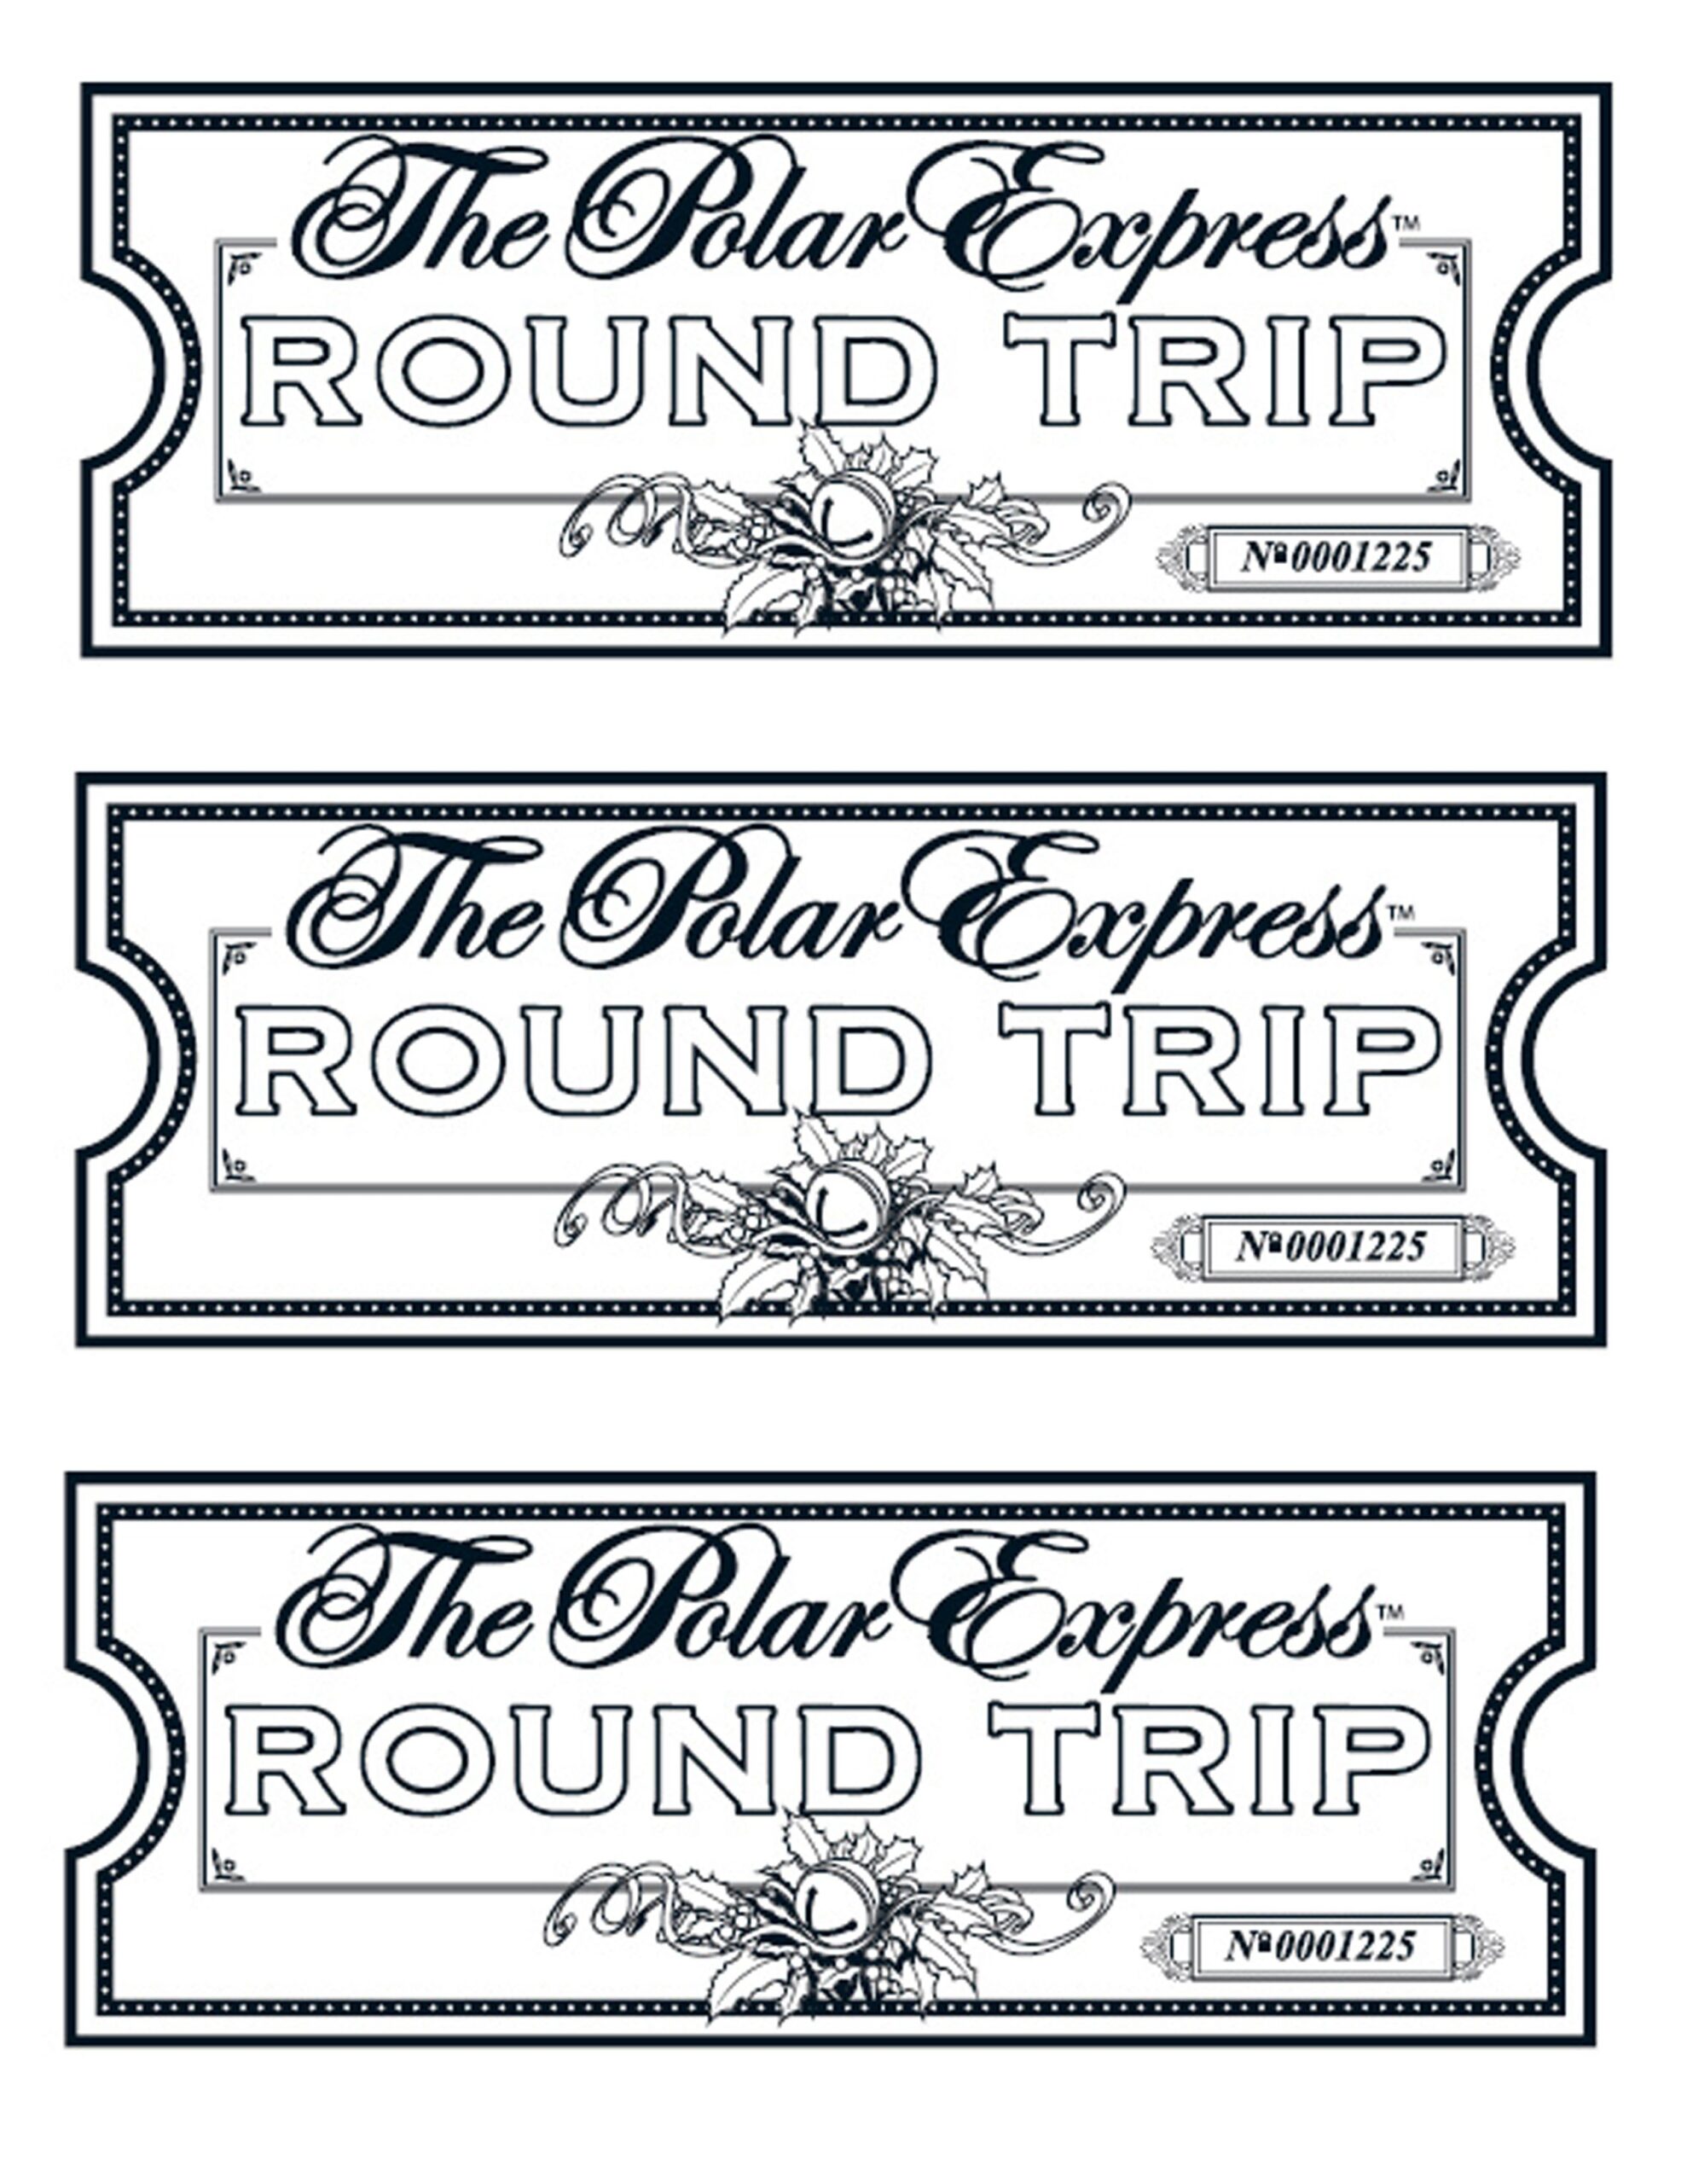 My Take On The Polar Express Tickets We Printed Them On Gold Paper Polar Express Christmas Party Polar Express Party Polar Express Tickets